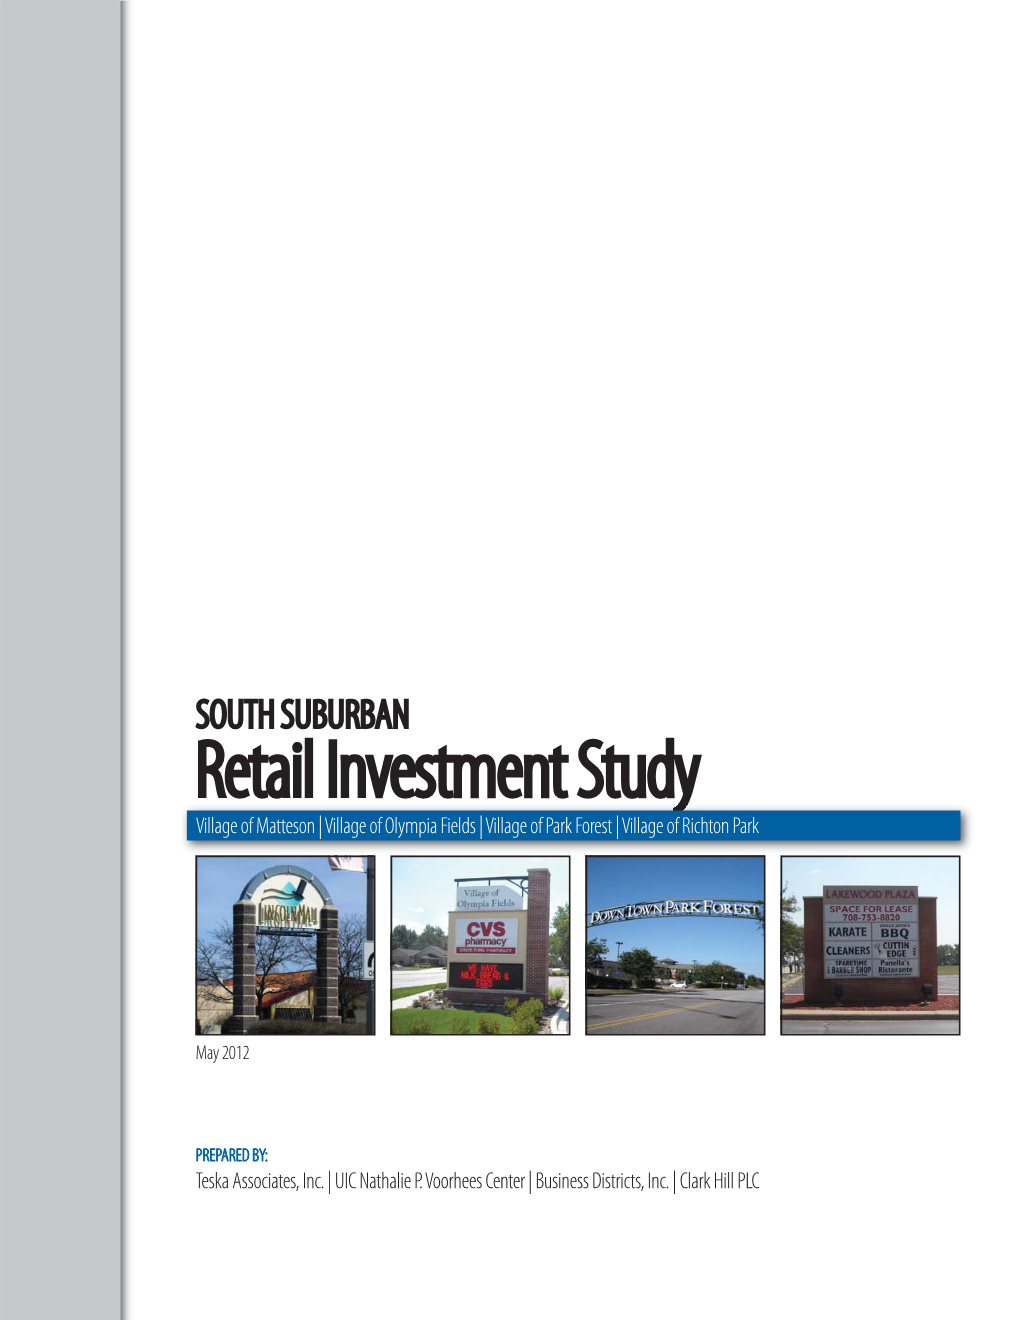 SOUTH SUBURBAN Retail Investment Study Village of Matteson | Village of Olympia Fields | Village of Park Forest | Village of Richton Park